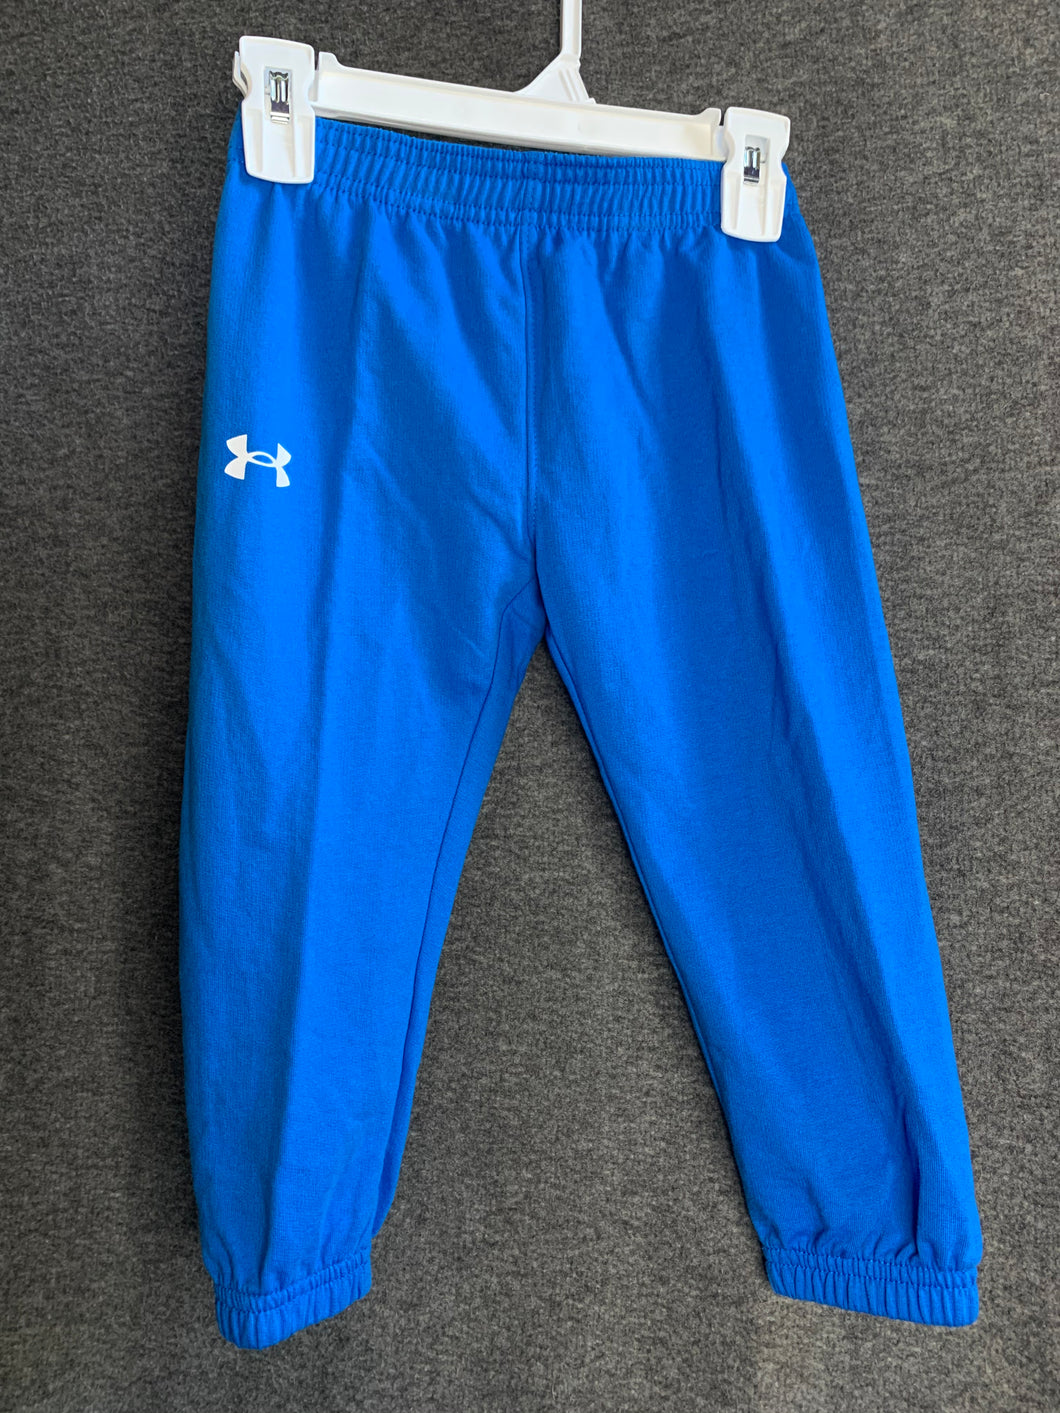 NWT Under Armour Pants 24 months